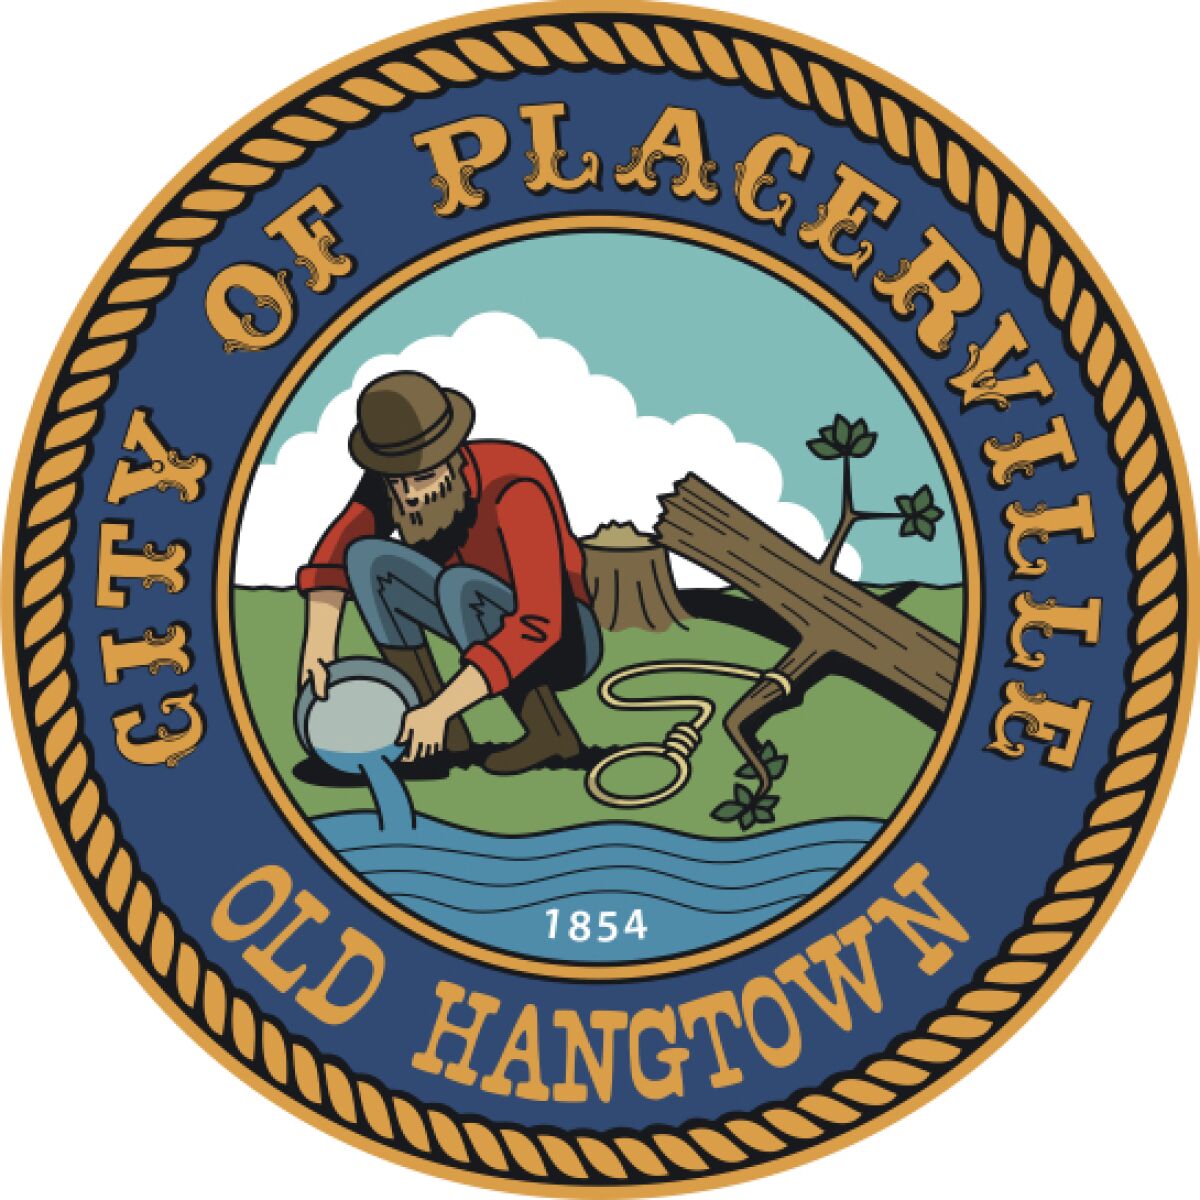 An altered version of Placerville's city logo shows the logo with the lynching tree chopped down.